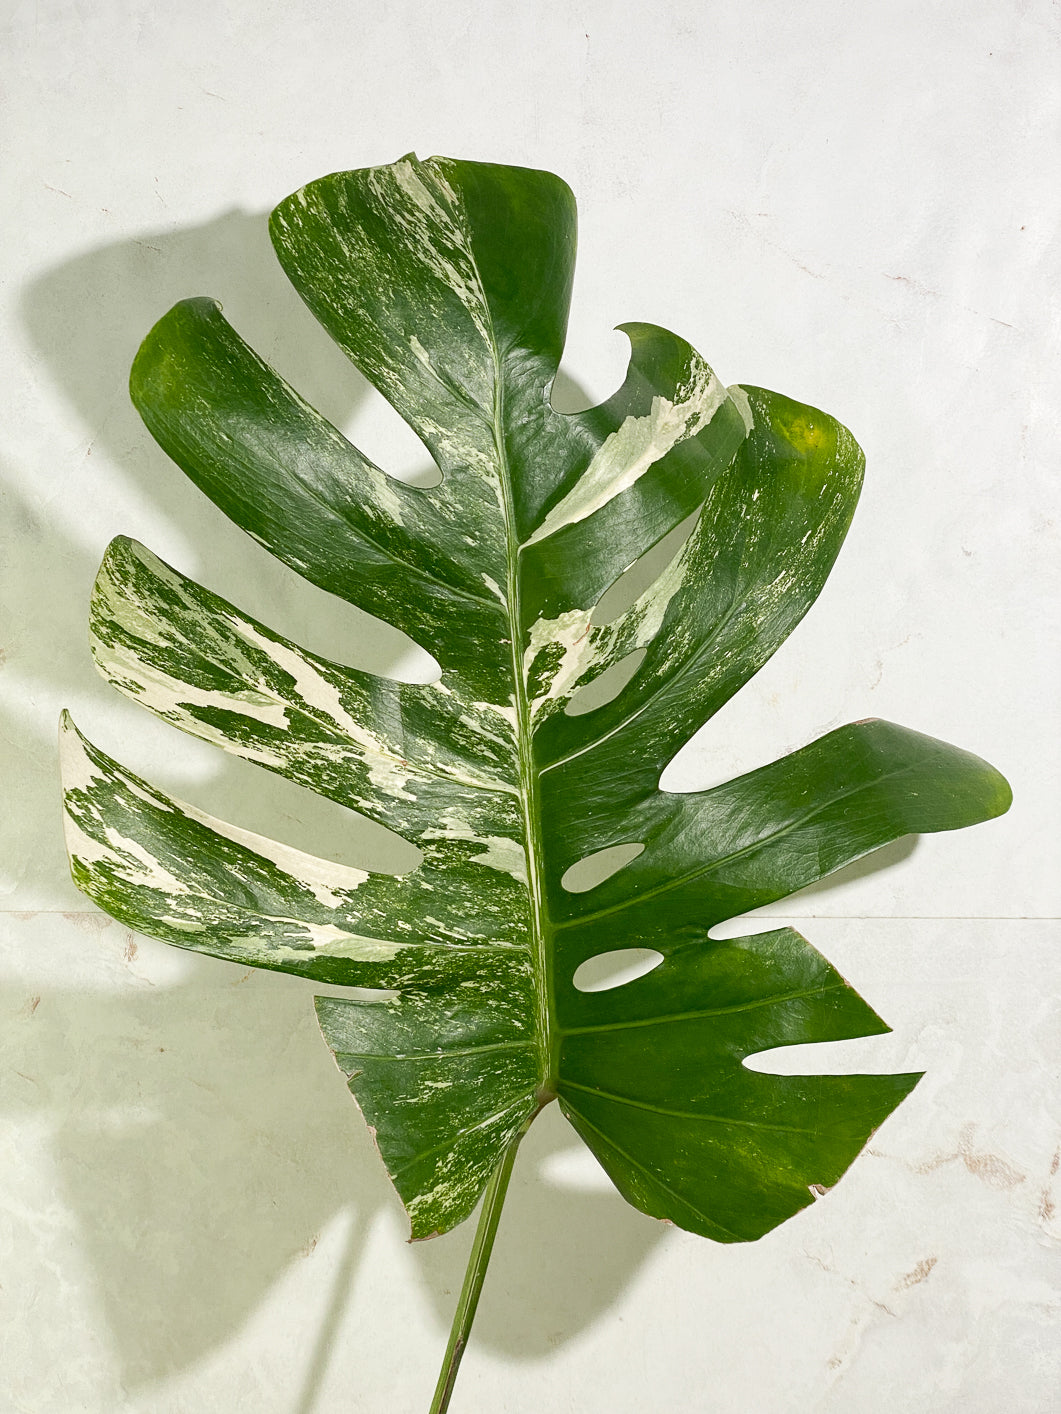 Monstera albo 1 large leaf 1 bud slightly rooted in moss